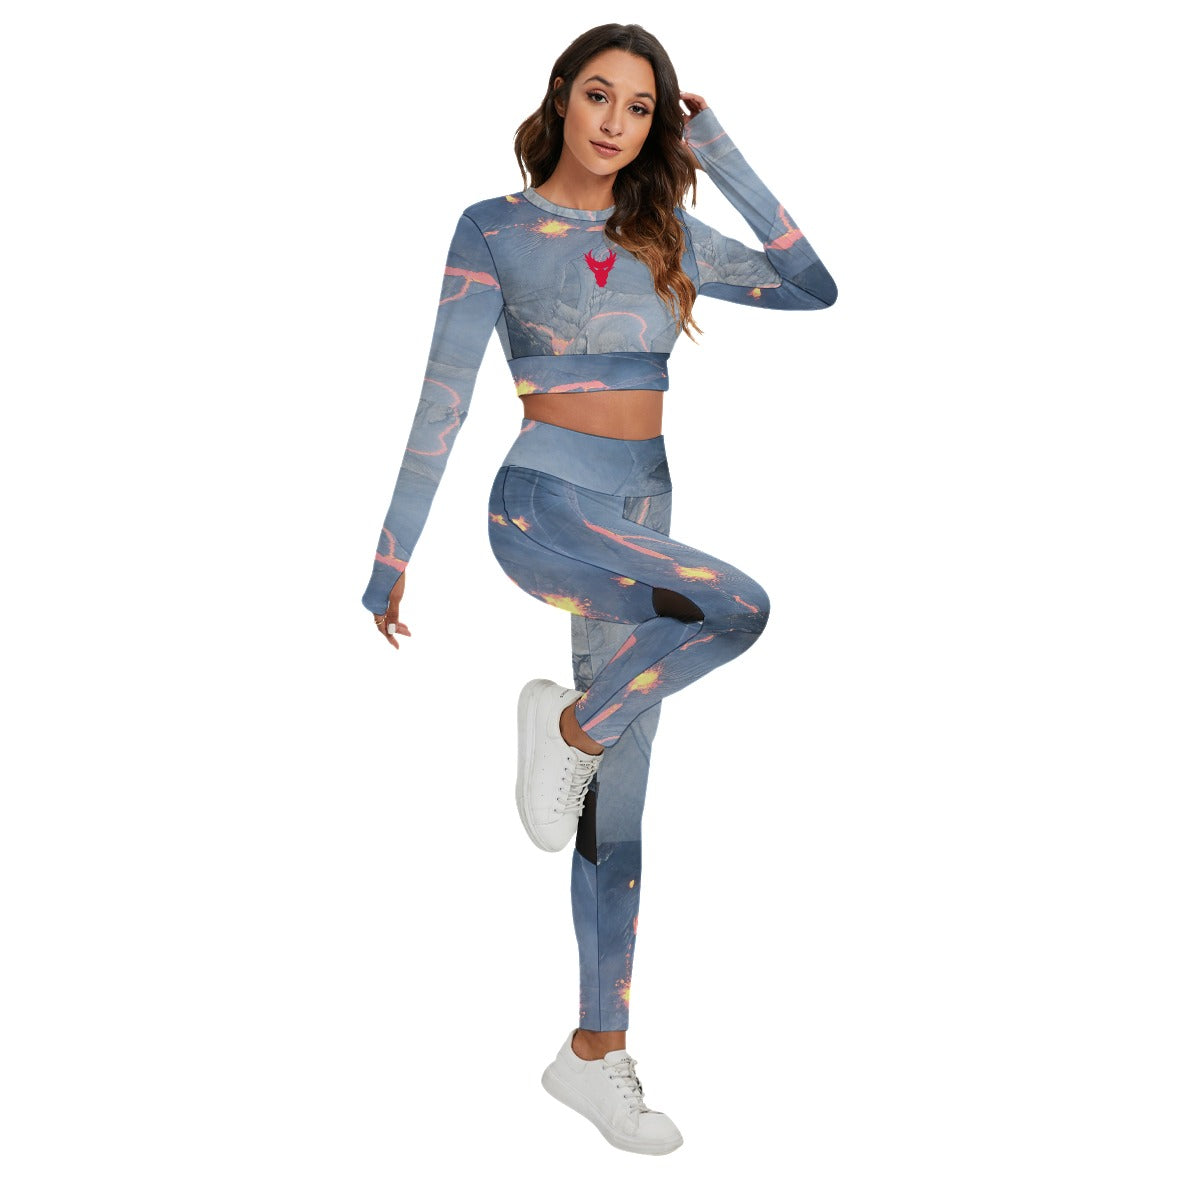 Dangerous Ground Dragon Fruit Women's Sport Set With Backless Top And Leggings